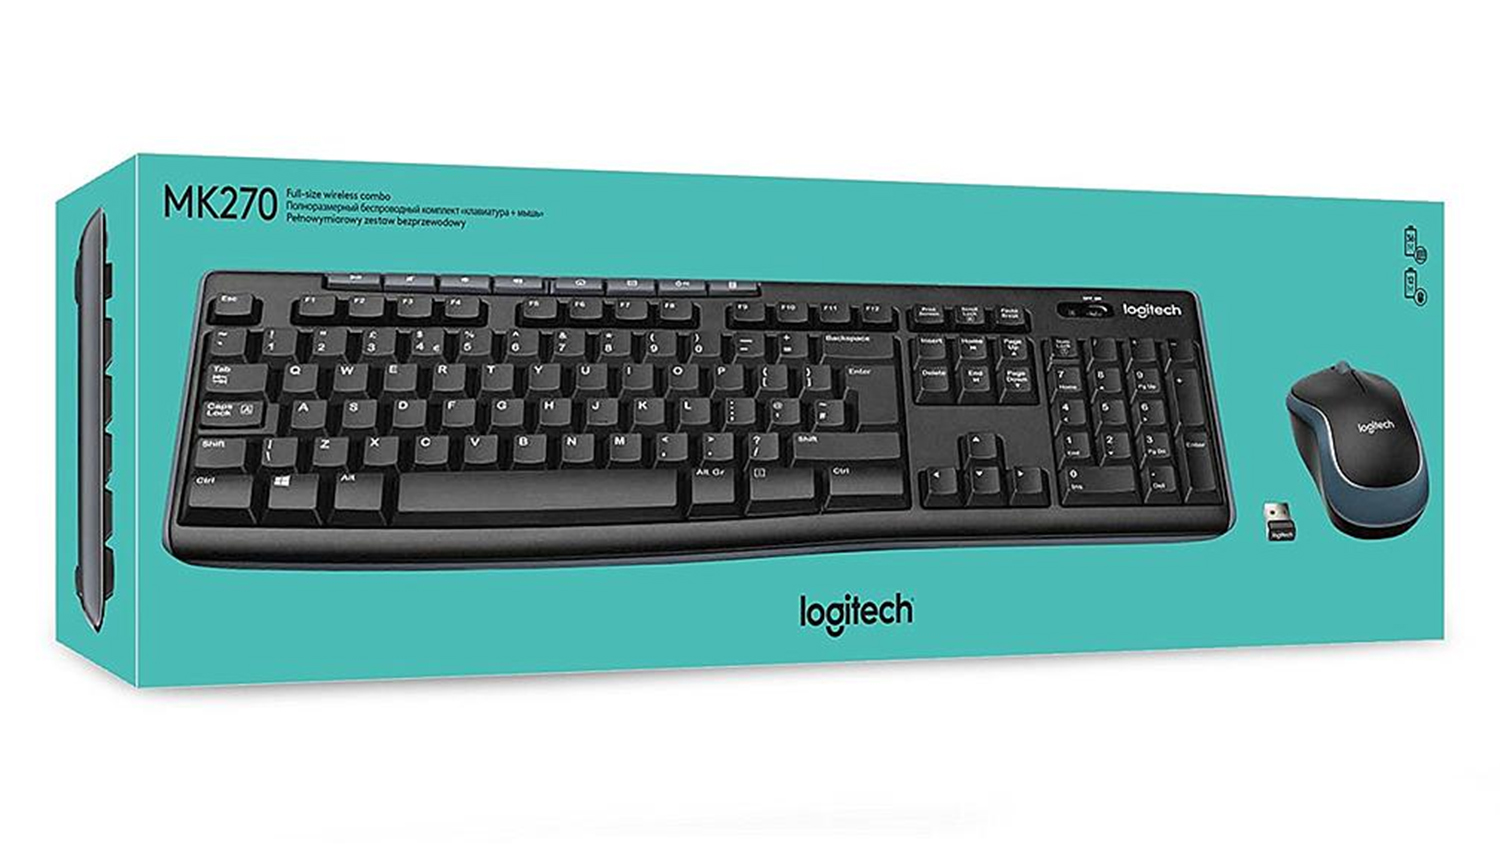 logitech wireless keyboard and mouse losing connection